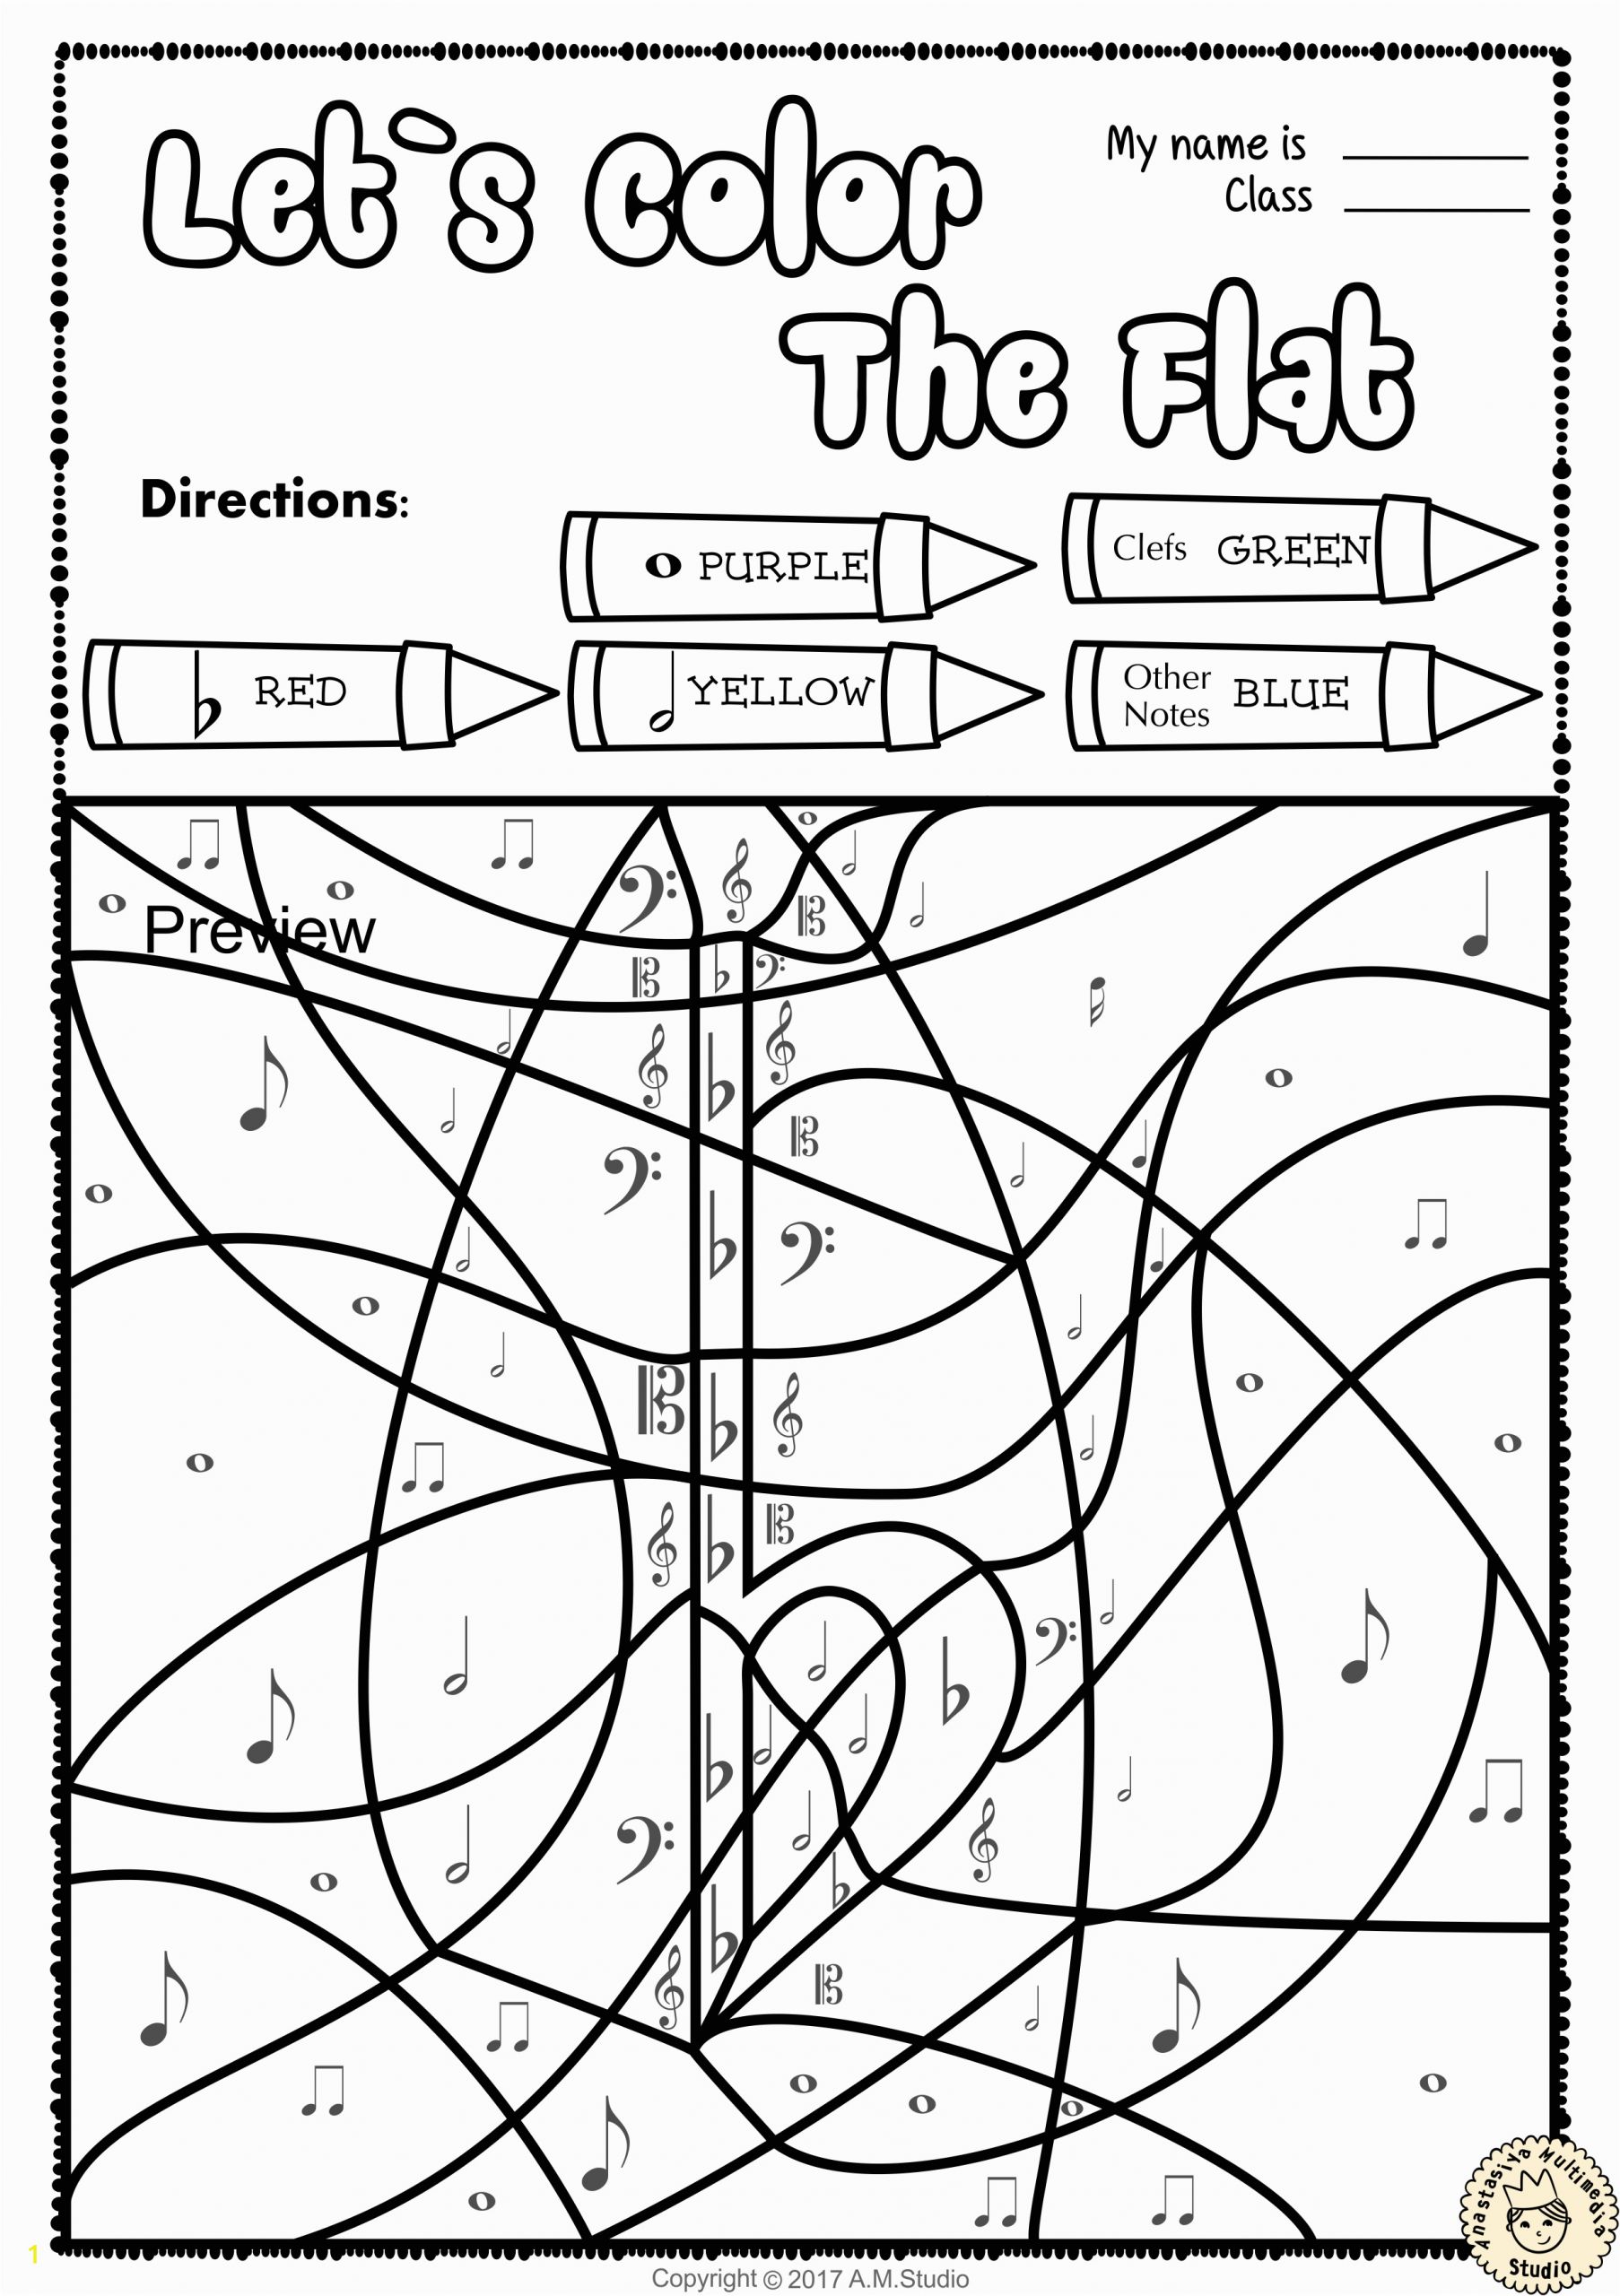 Coloring Pages for Quarter Notes Let S Learn the Music Symbols No Prep Printables Pack